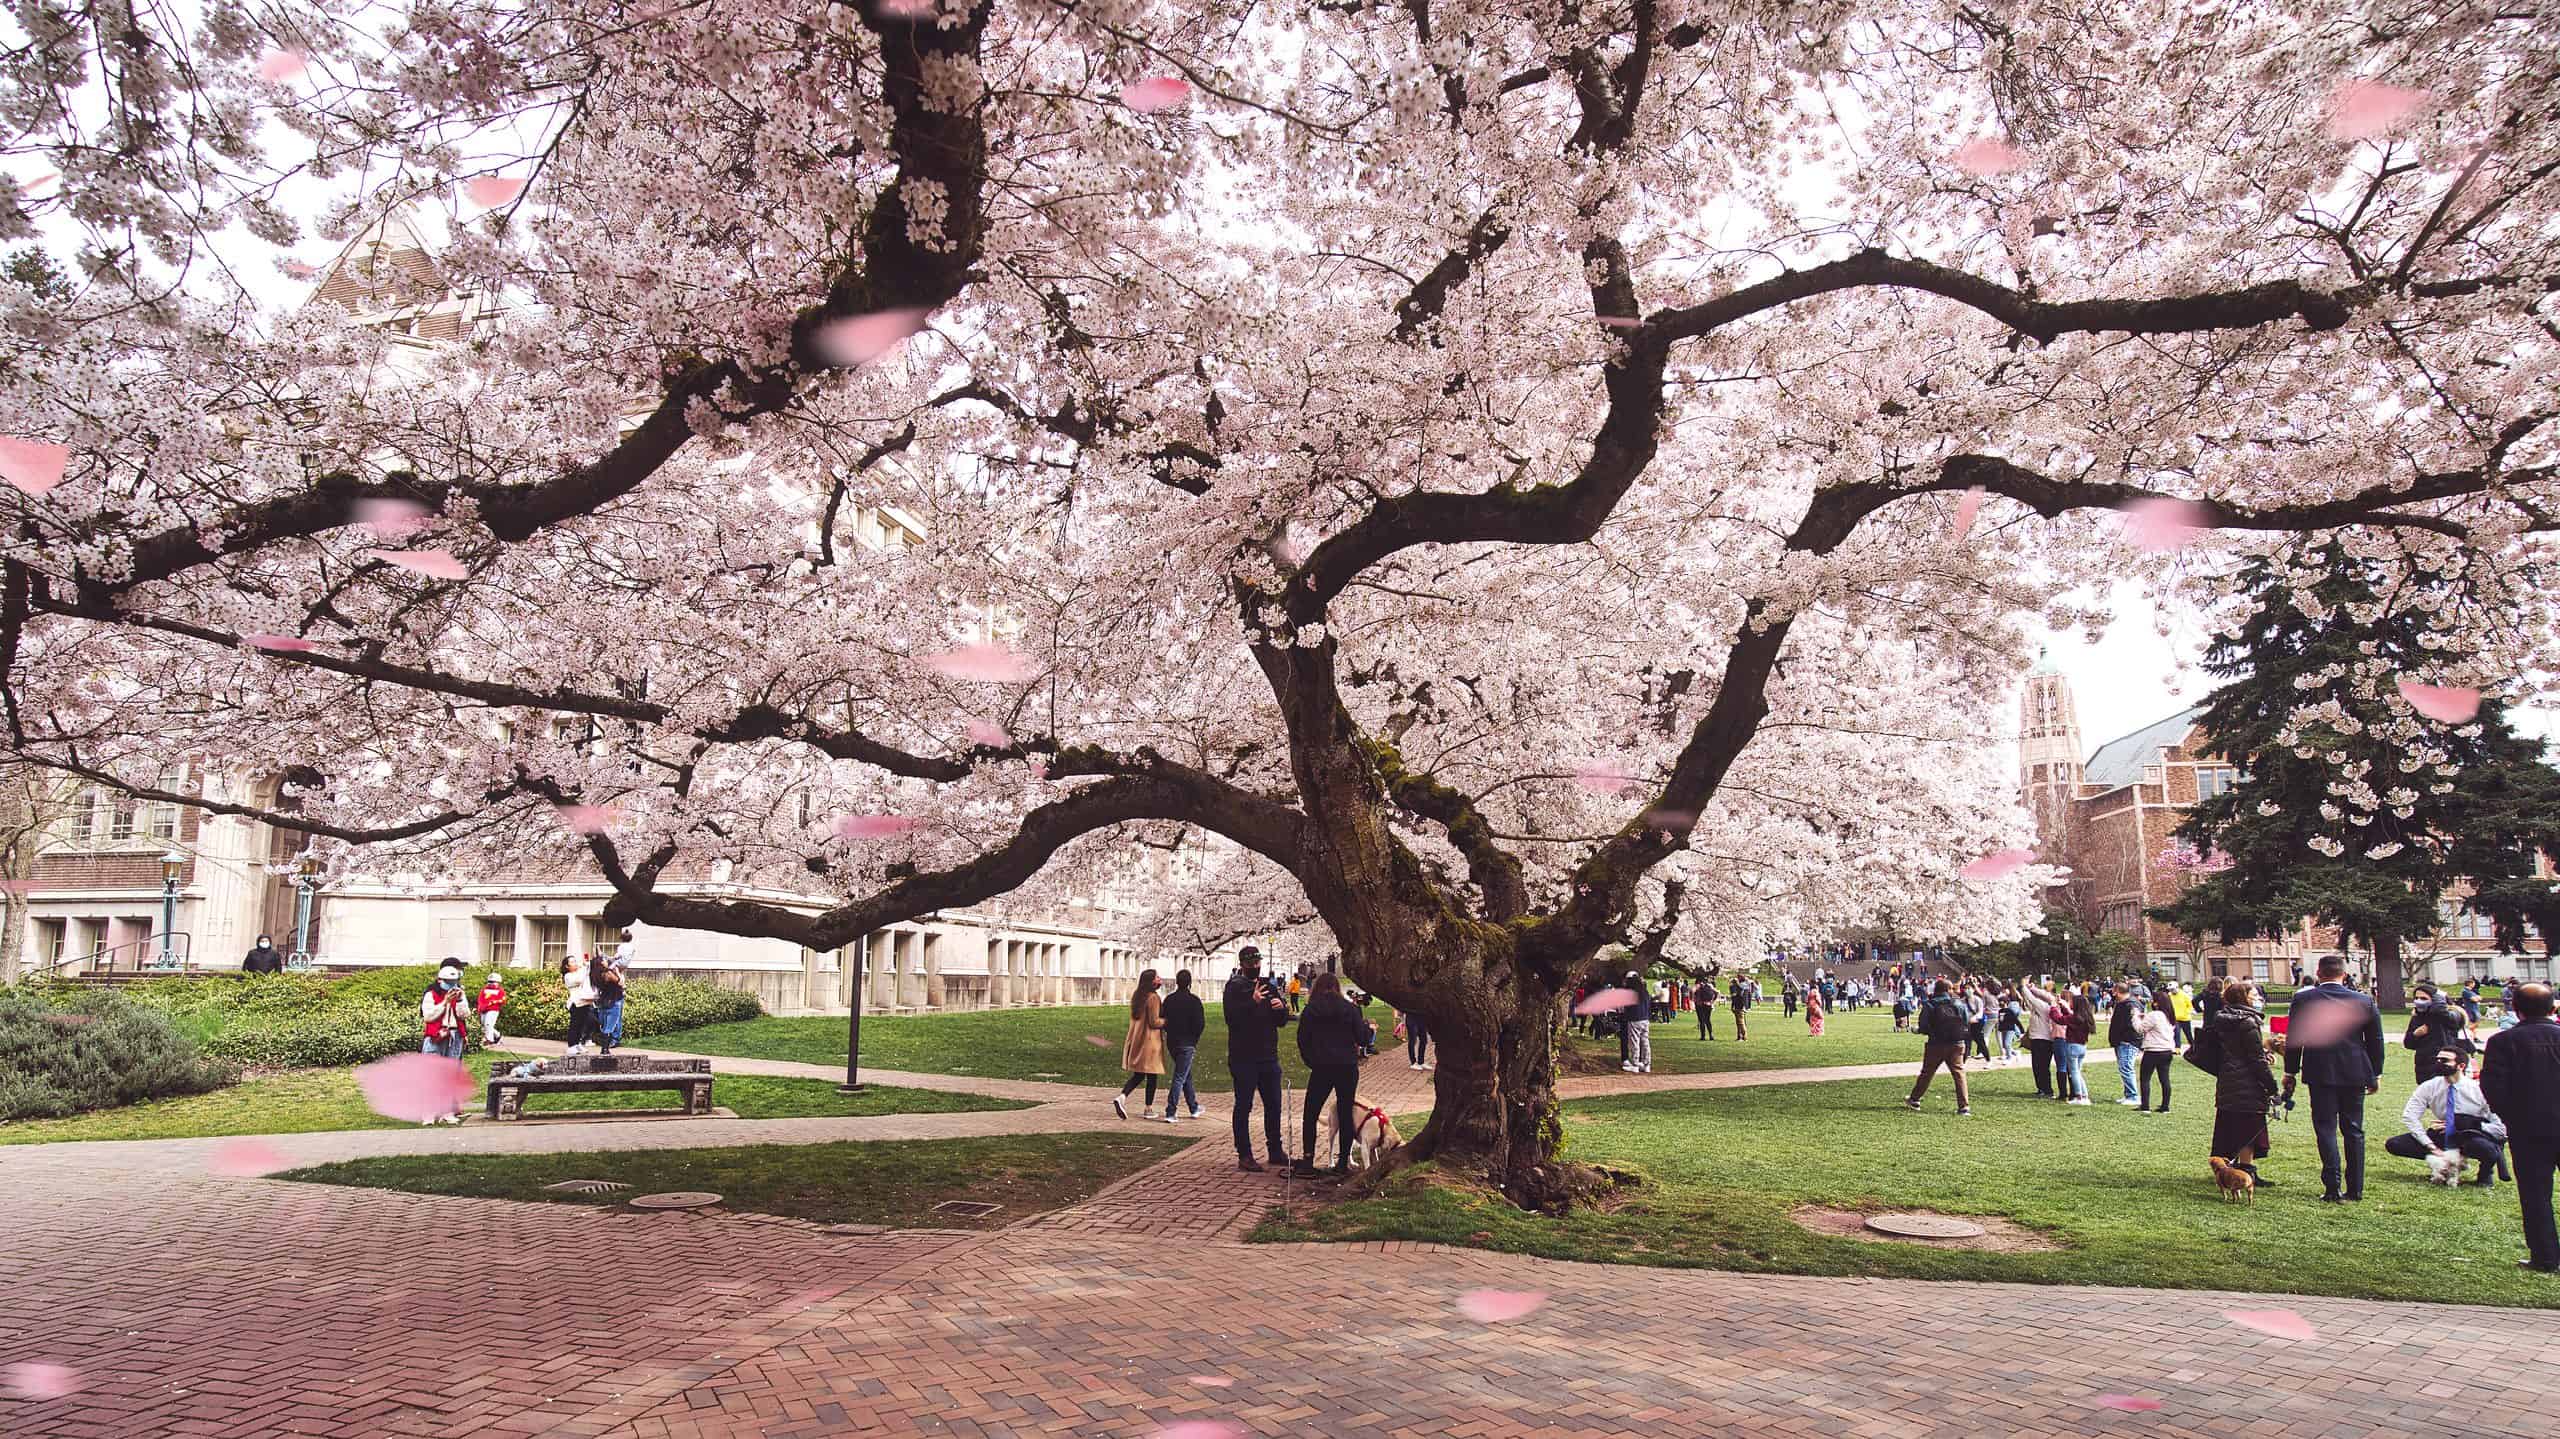 A magnificent photo of the Cherry blossom tree at the University of Washington in Seattle